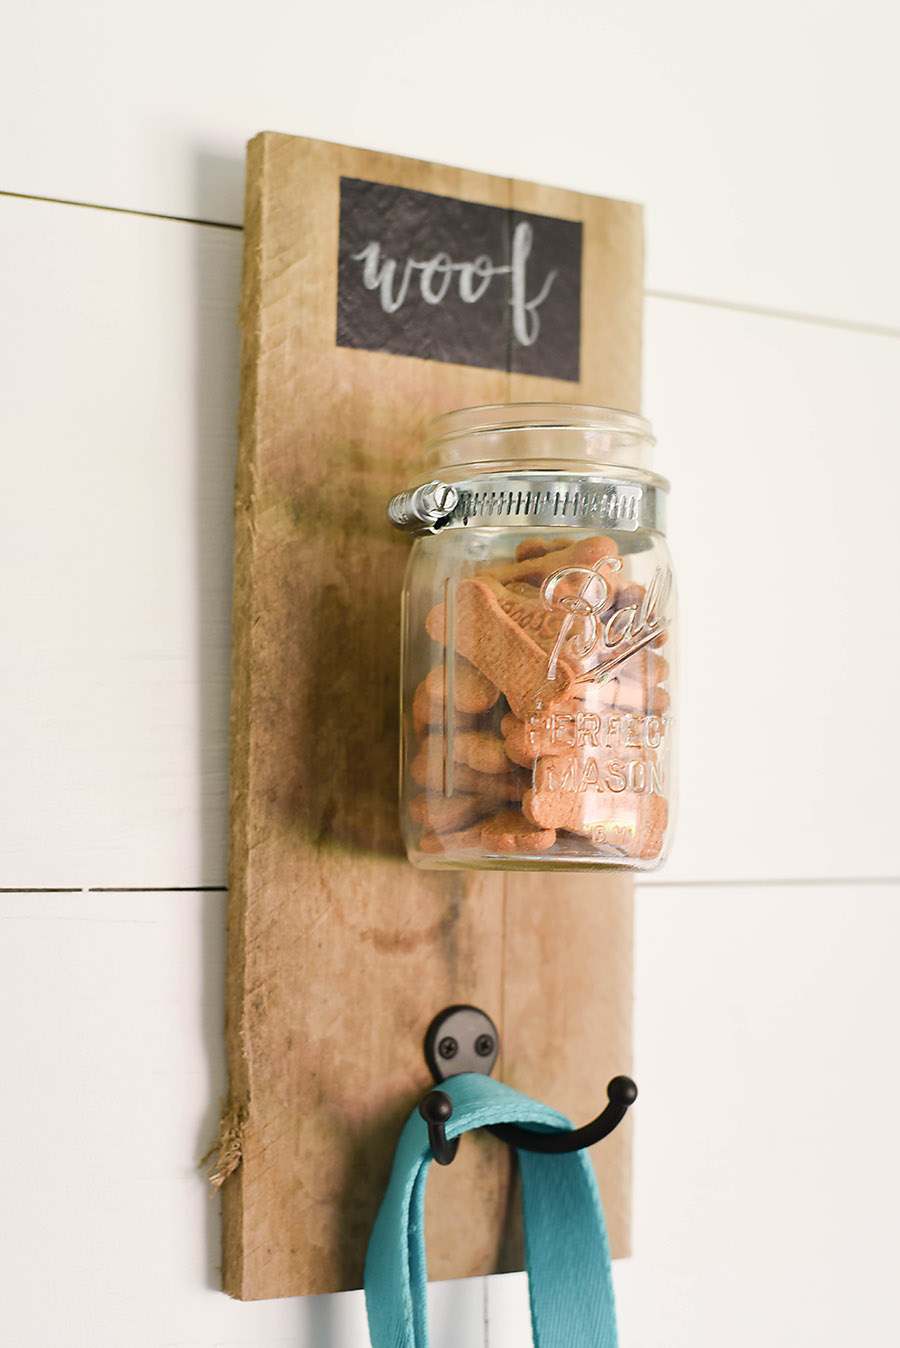 Dog Treat Holder DIY  Organize treats and leashes in an adorable way!